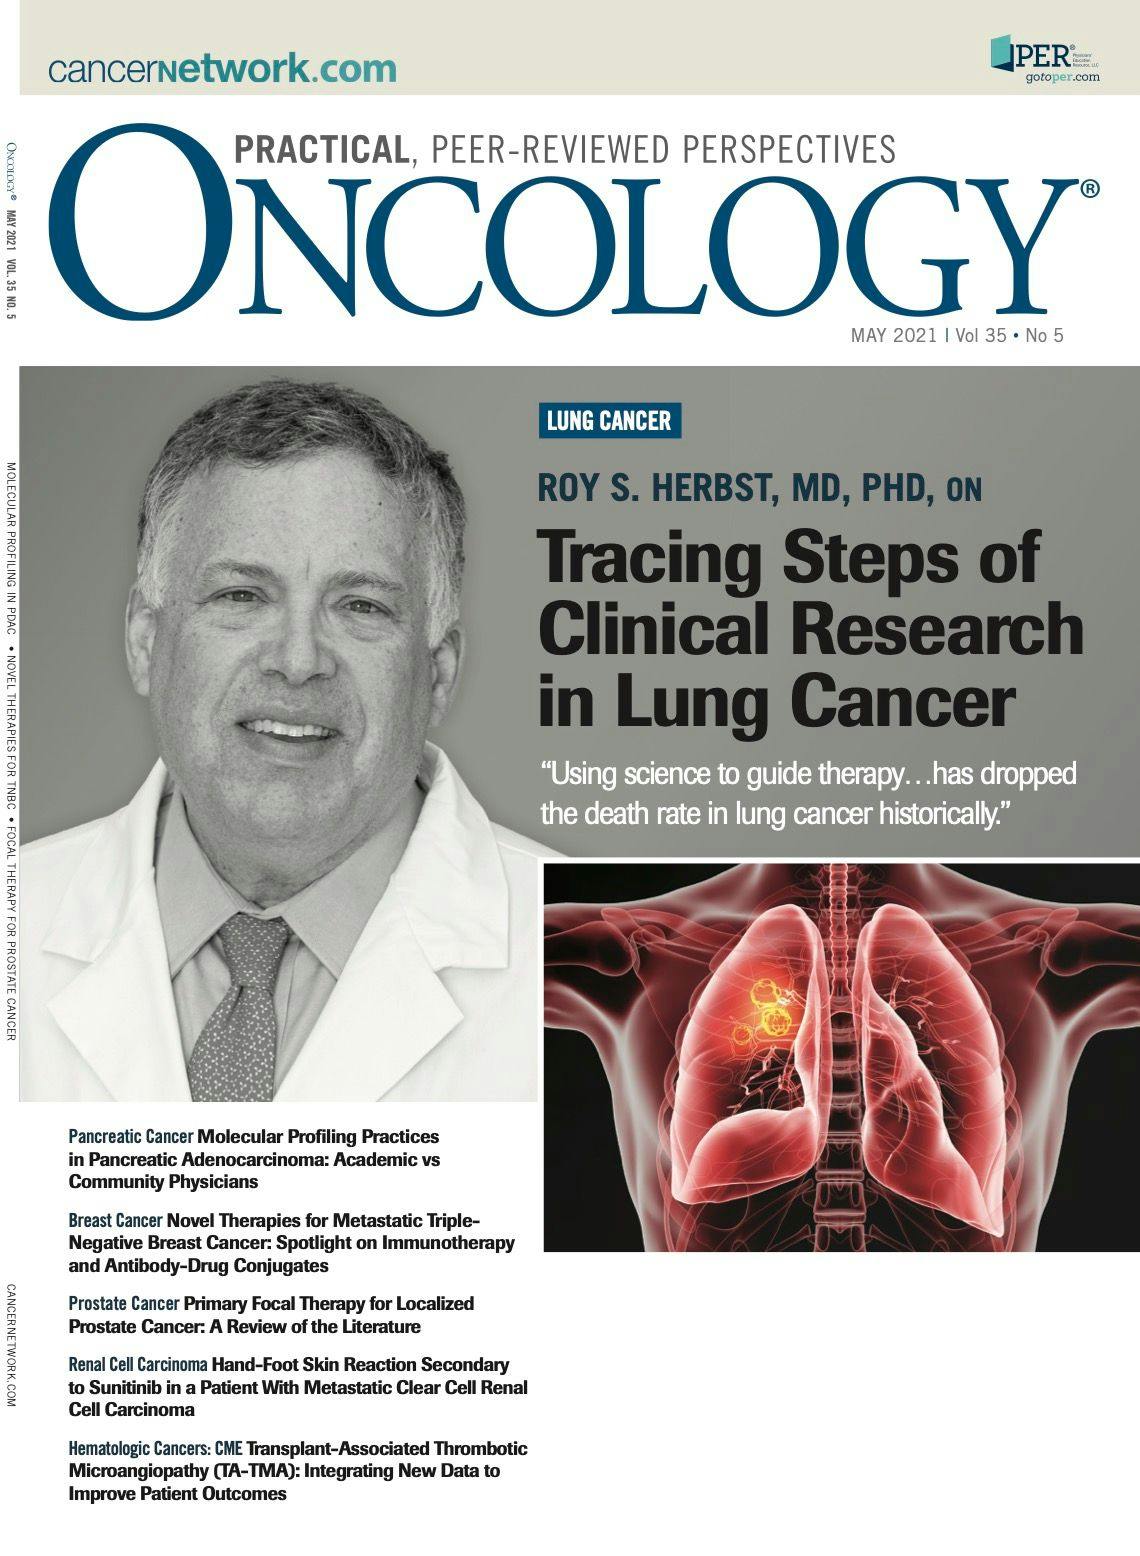 ONCOLOGY Vol 35, Issue 5